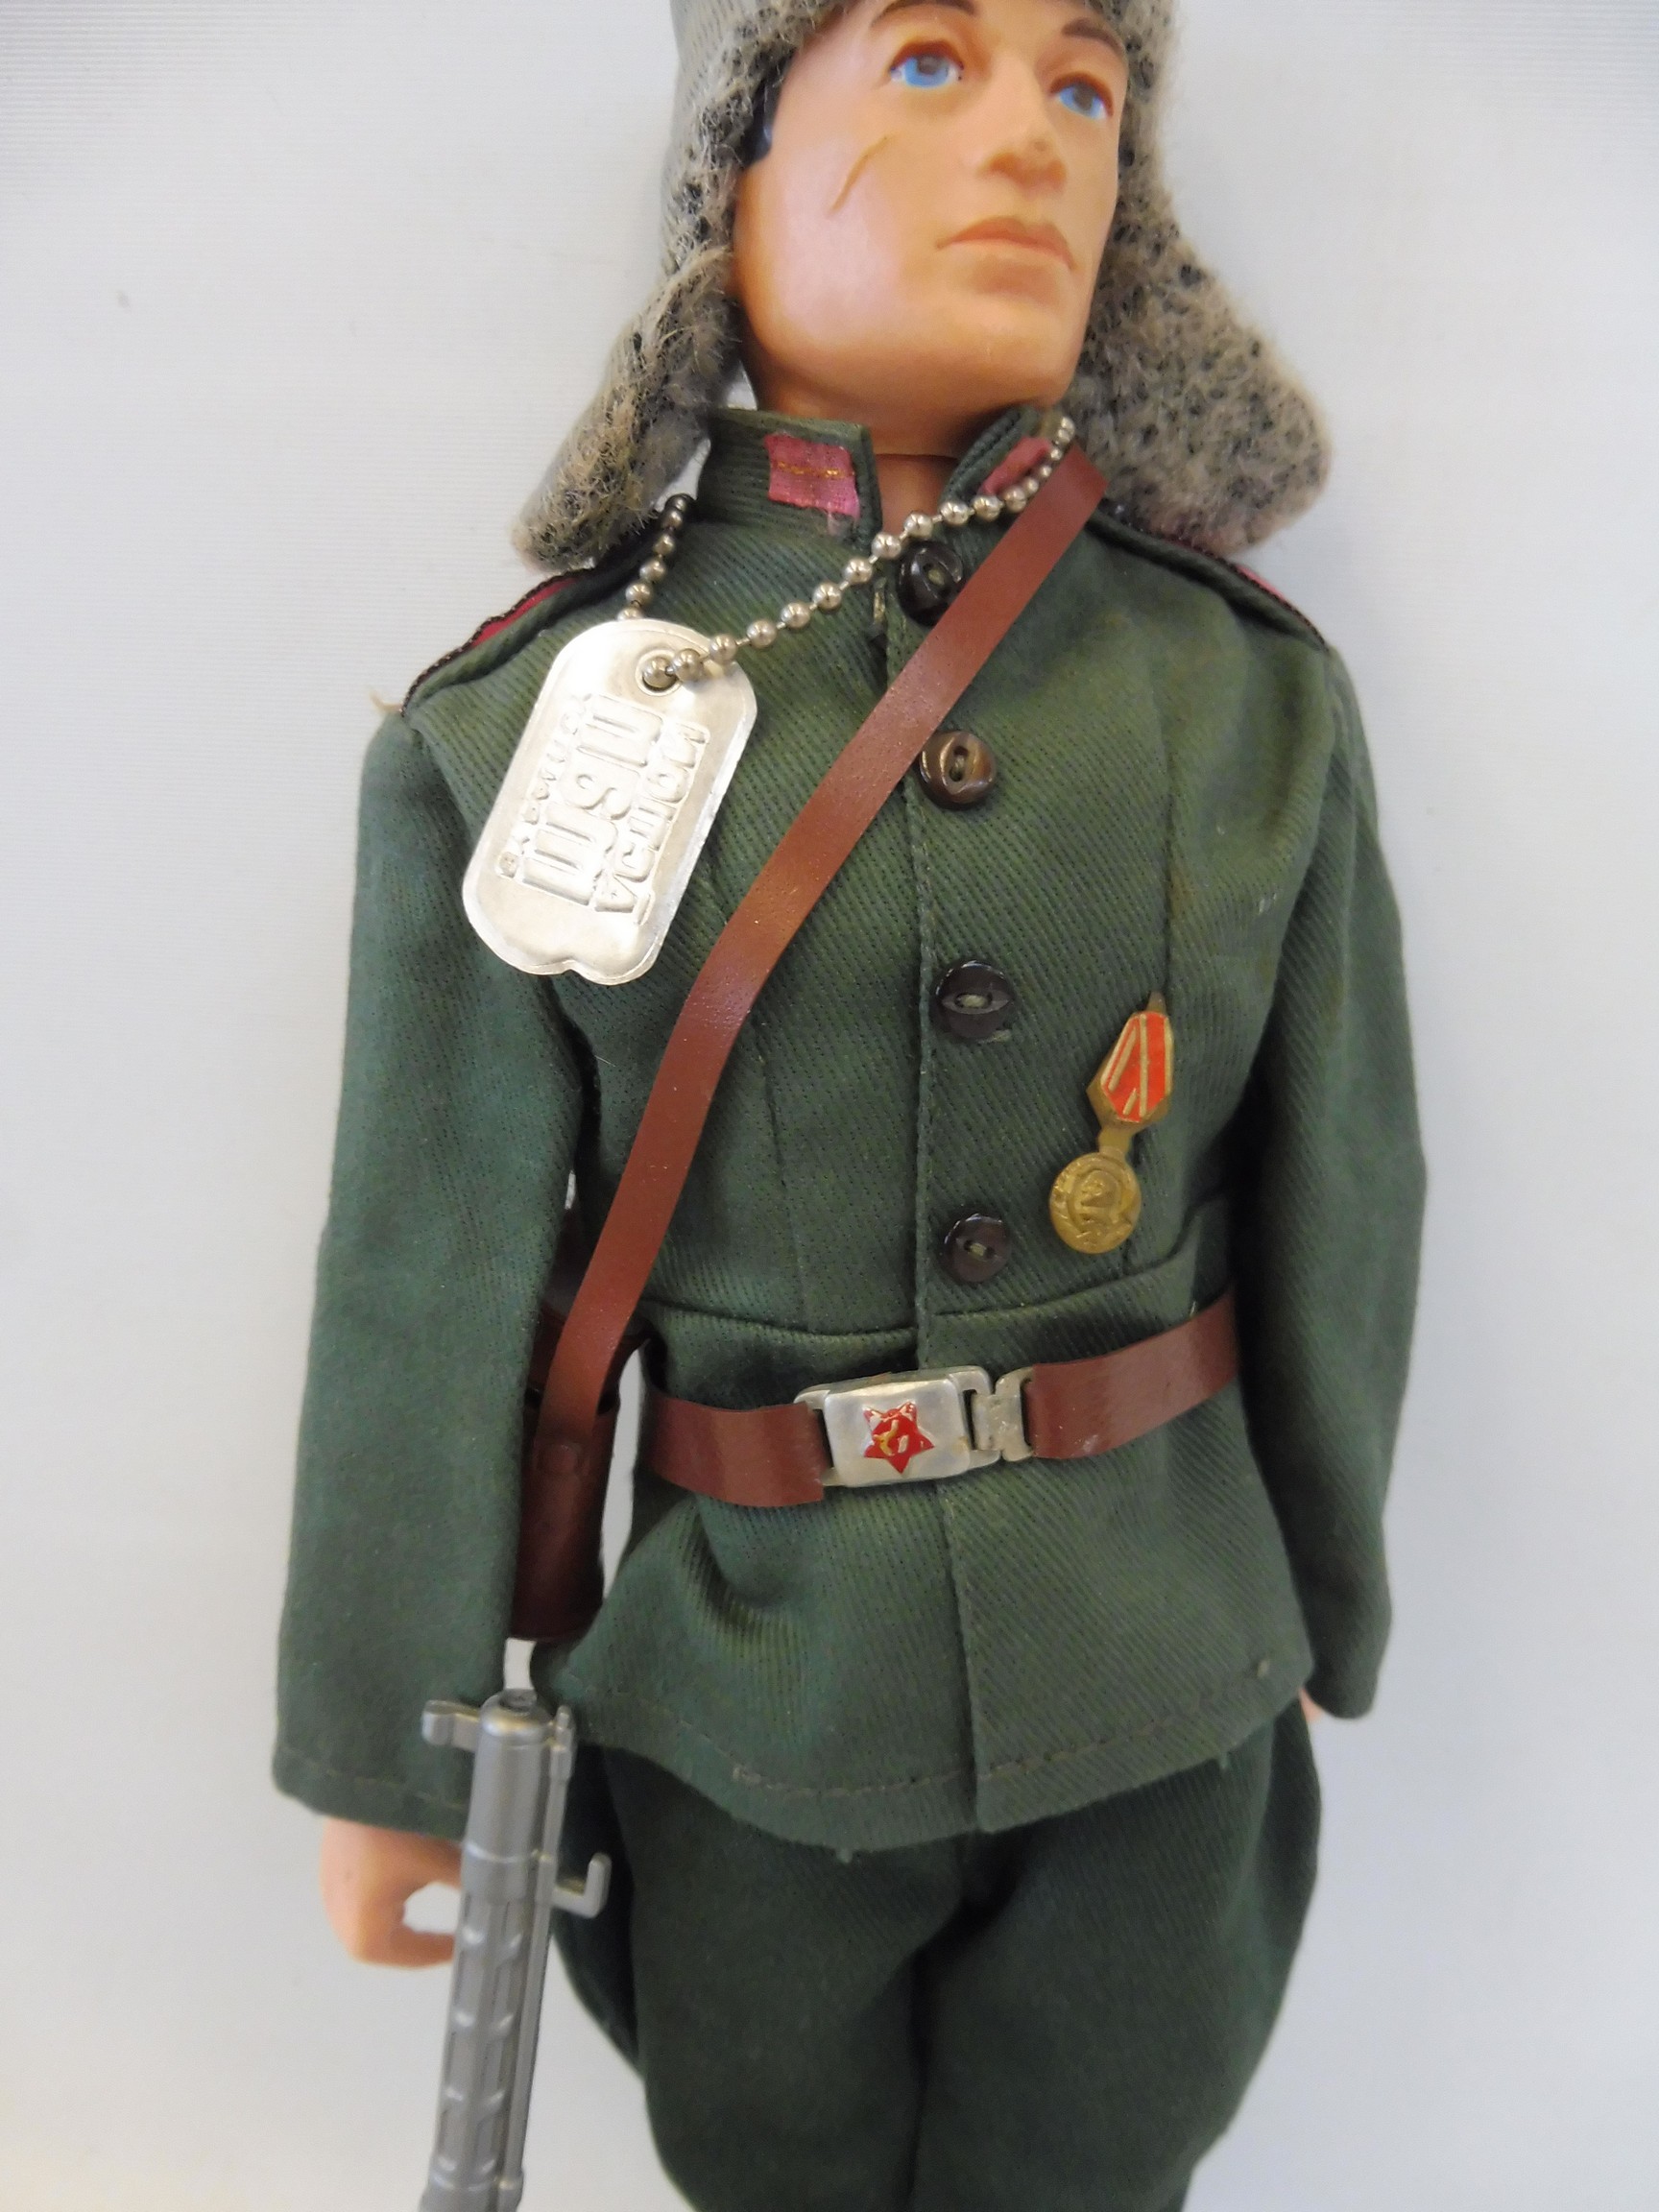 A complete Action Man Russian figure, in excellent condition, complete with dog tag, medal, grenades - Image 2 of 3